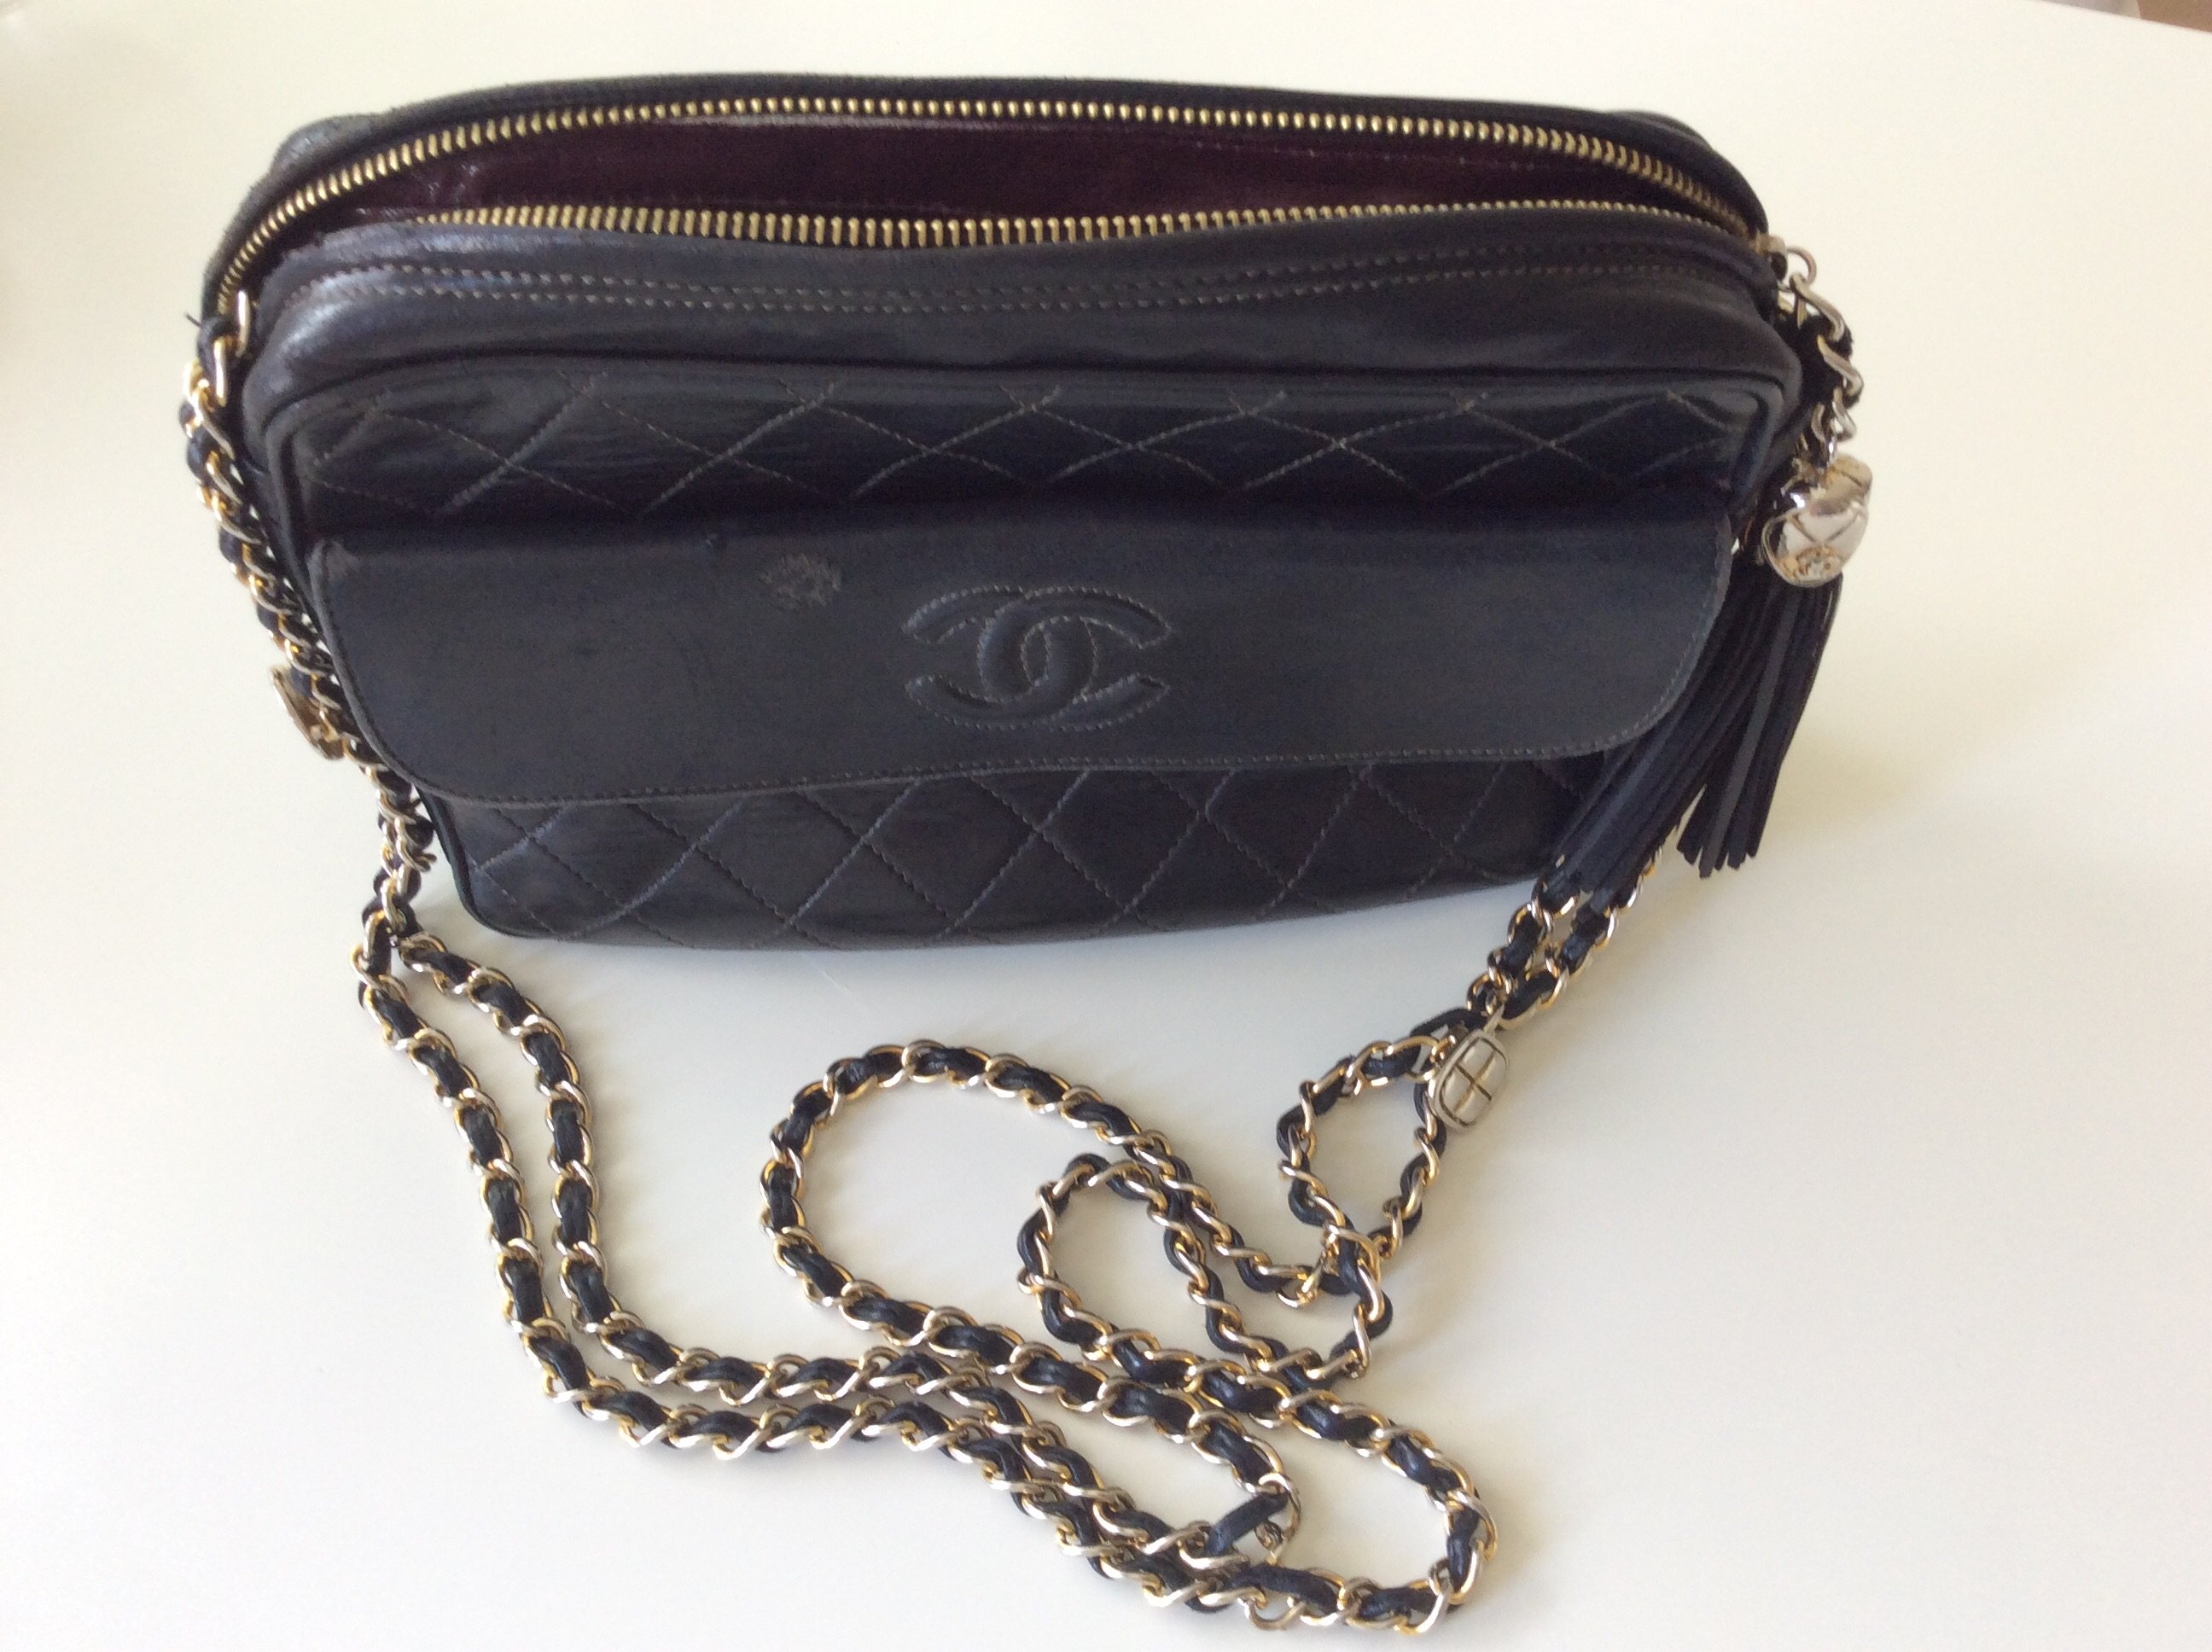 Are Chanel Bags From France or Italy? | Bragmybag